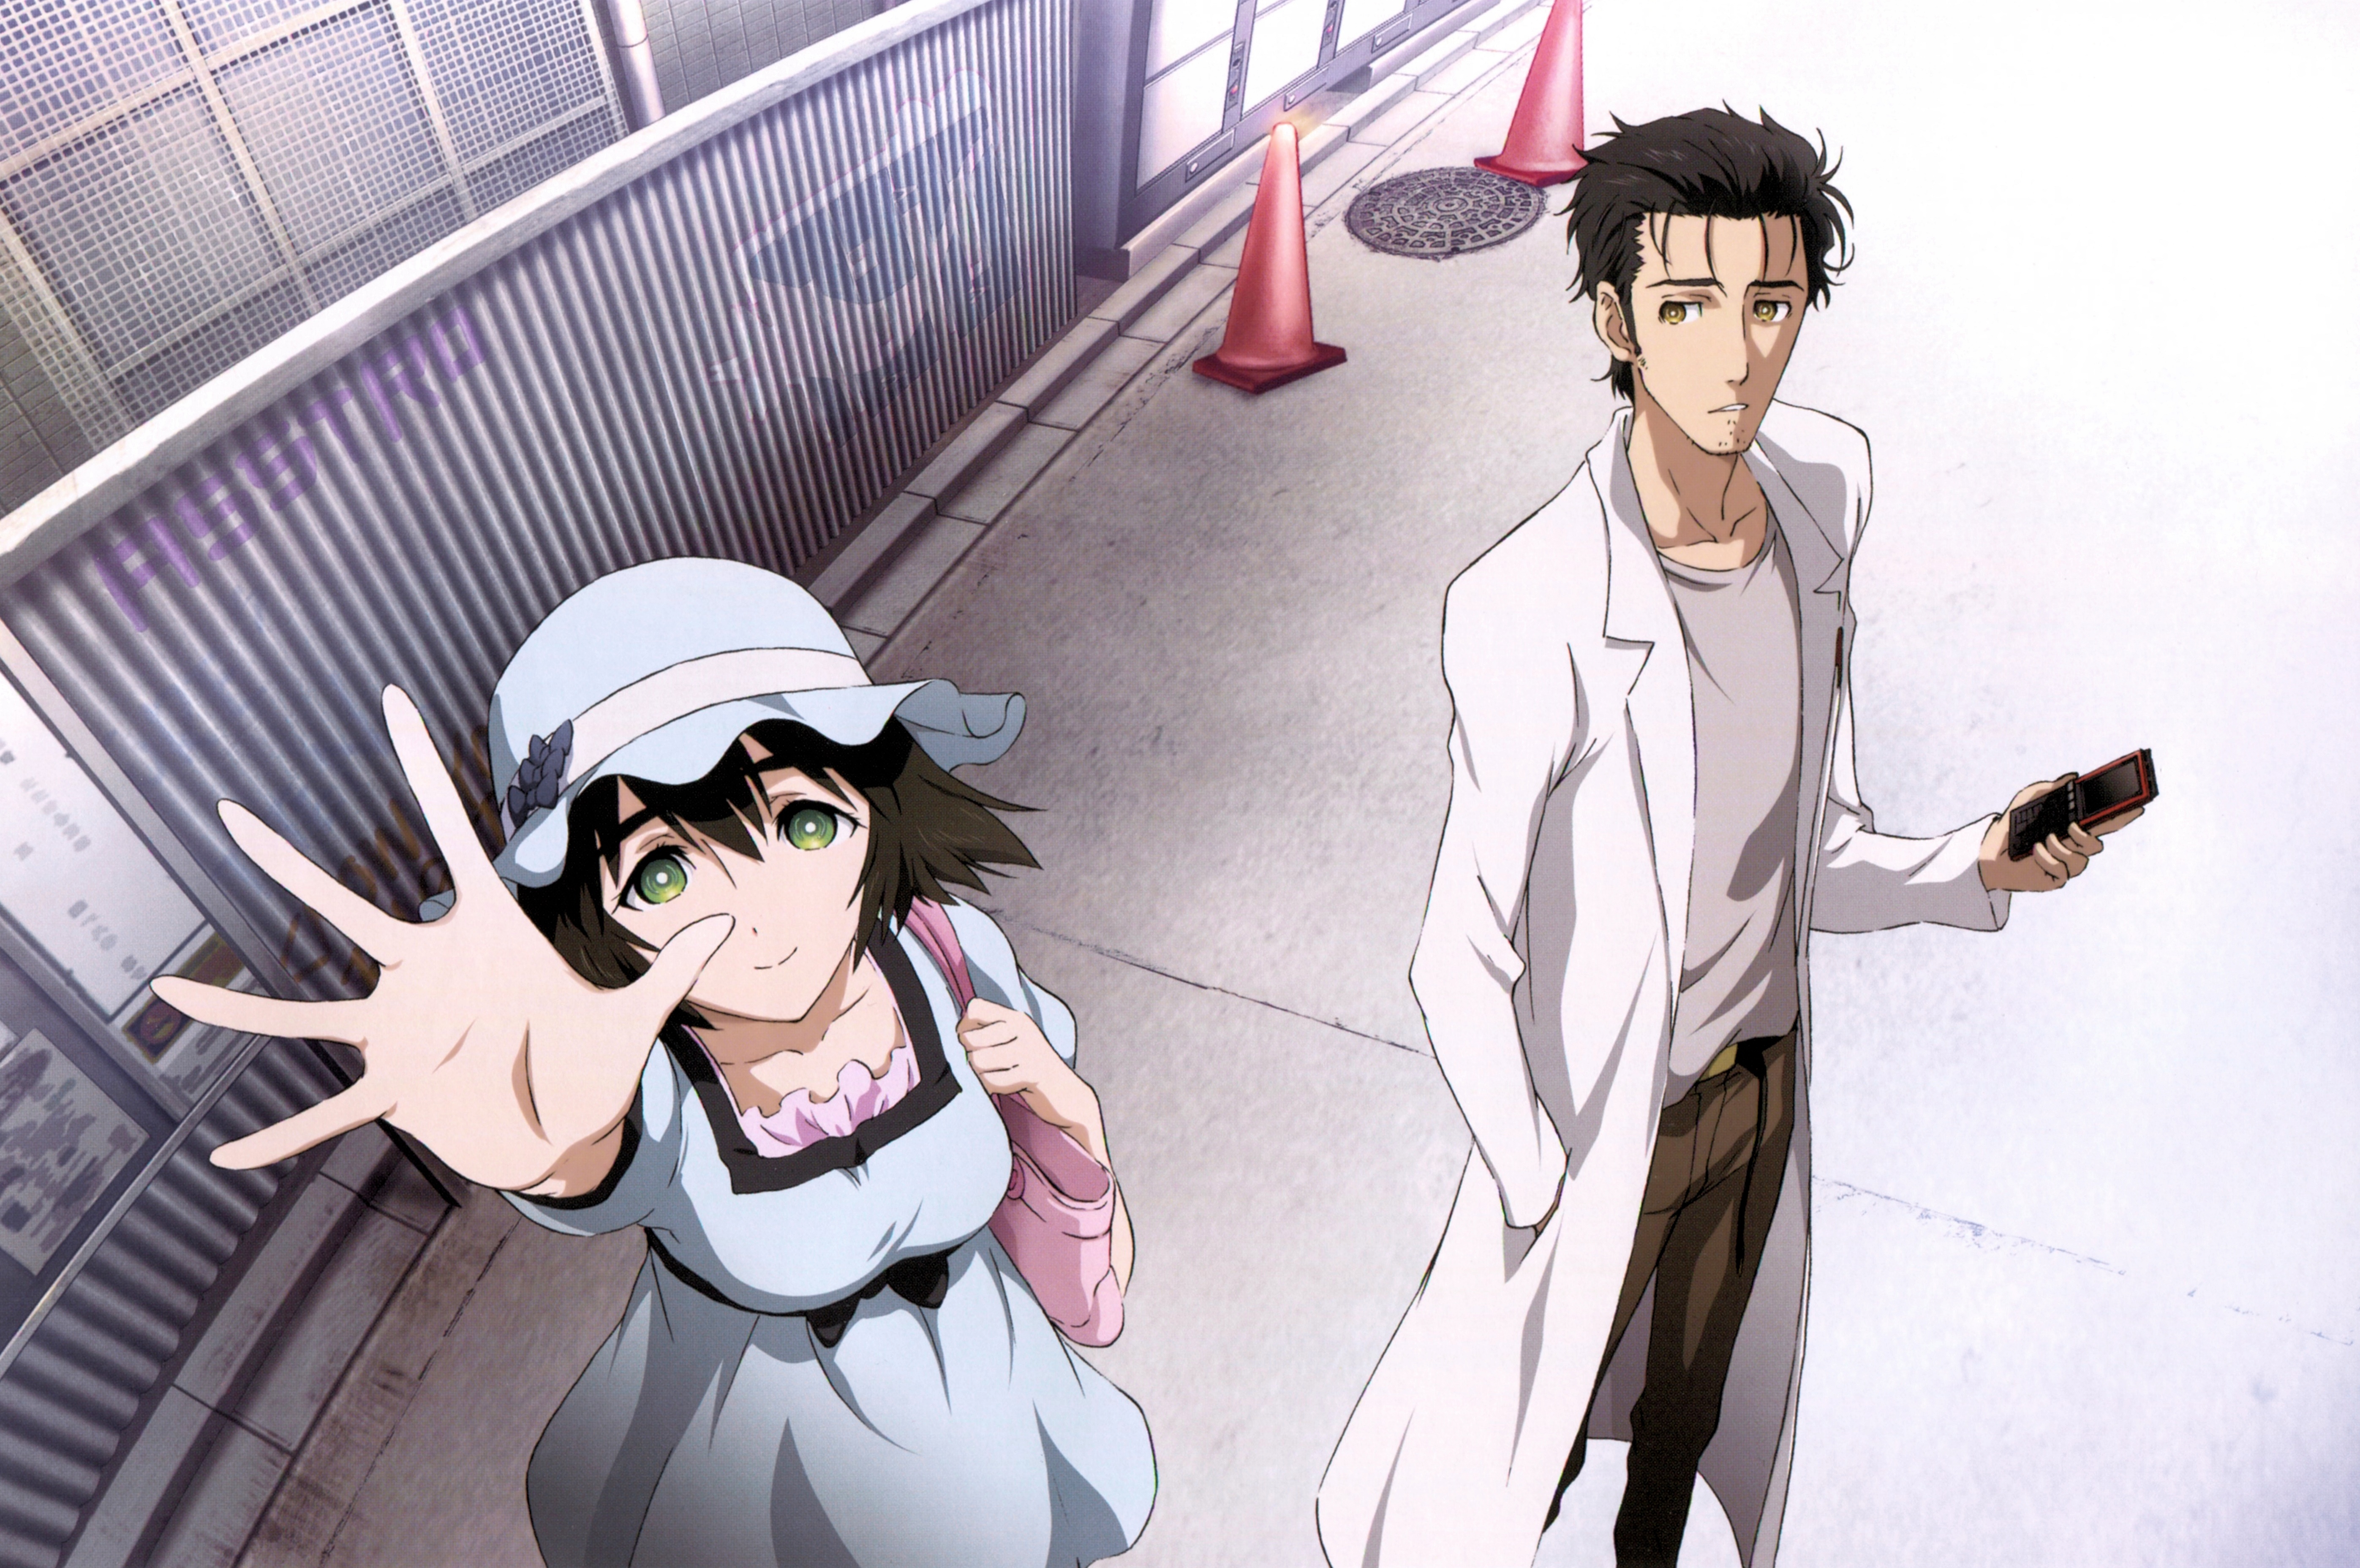 Steins Gate Coloring Book: Rintaro Okabe Anime Series Coloring Book Get  Creative Be Inspired Have Fun And Chill Out With 8.5 X 11